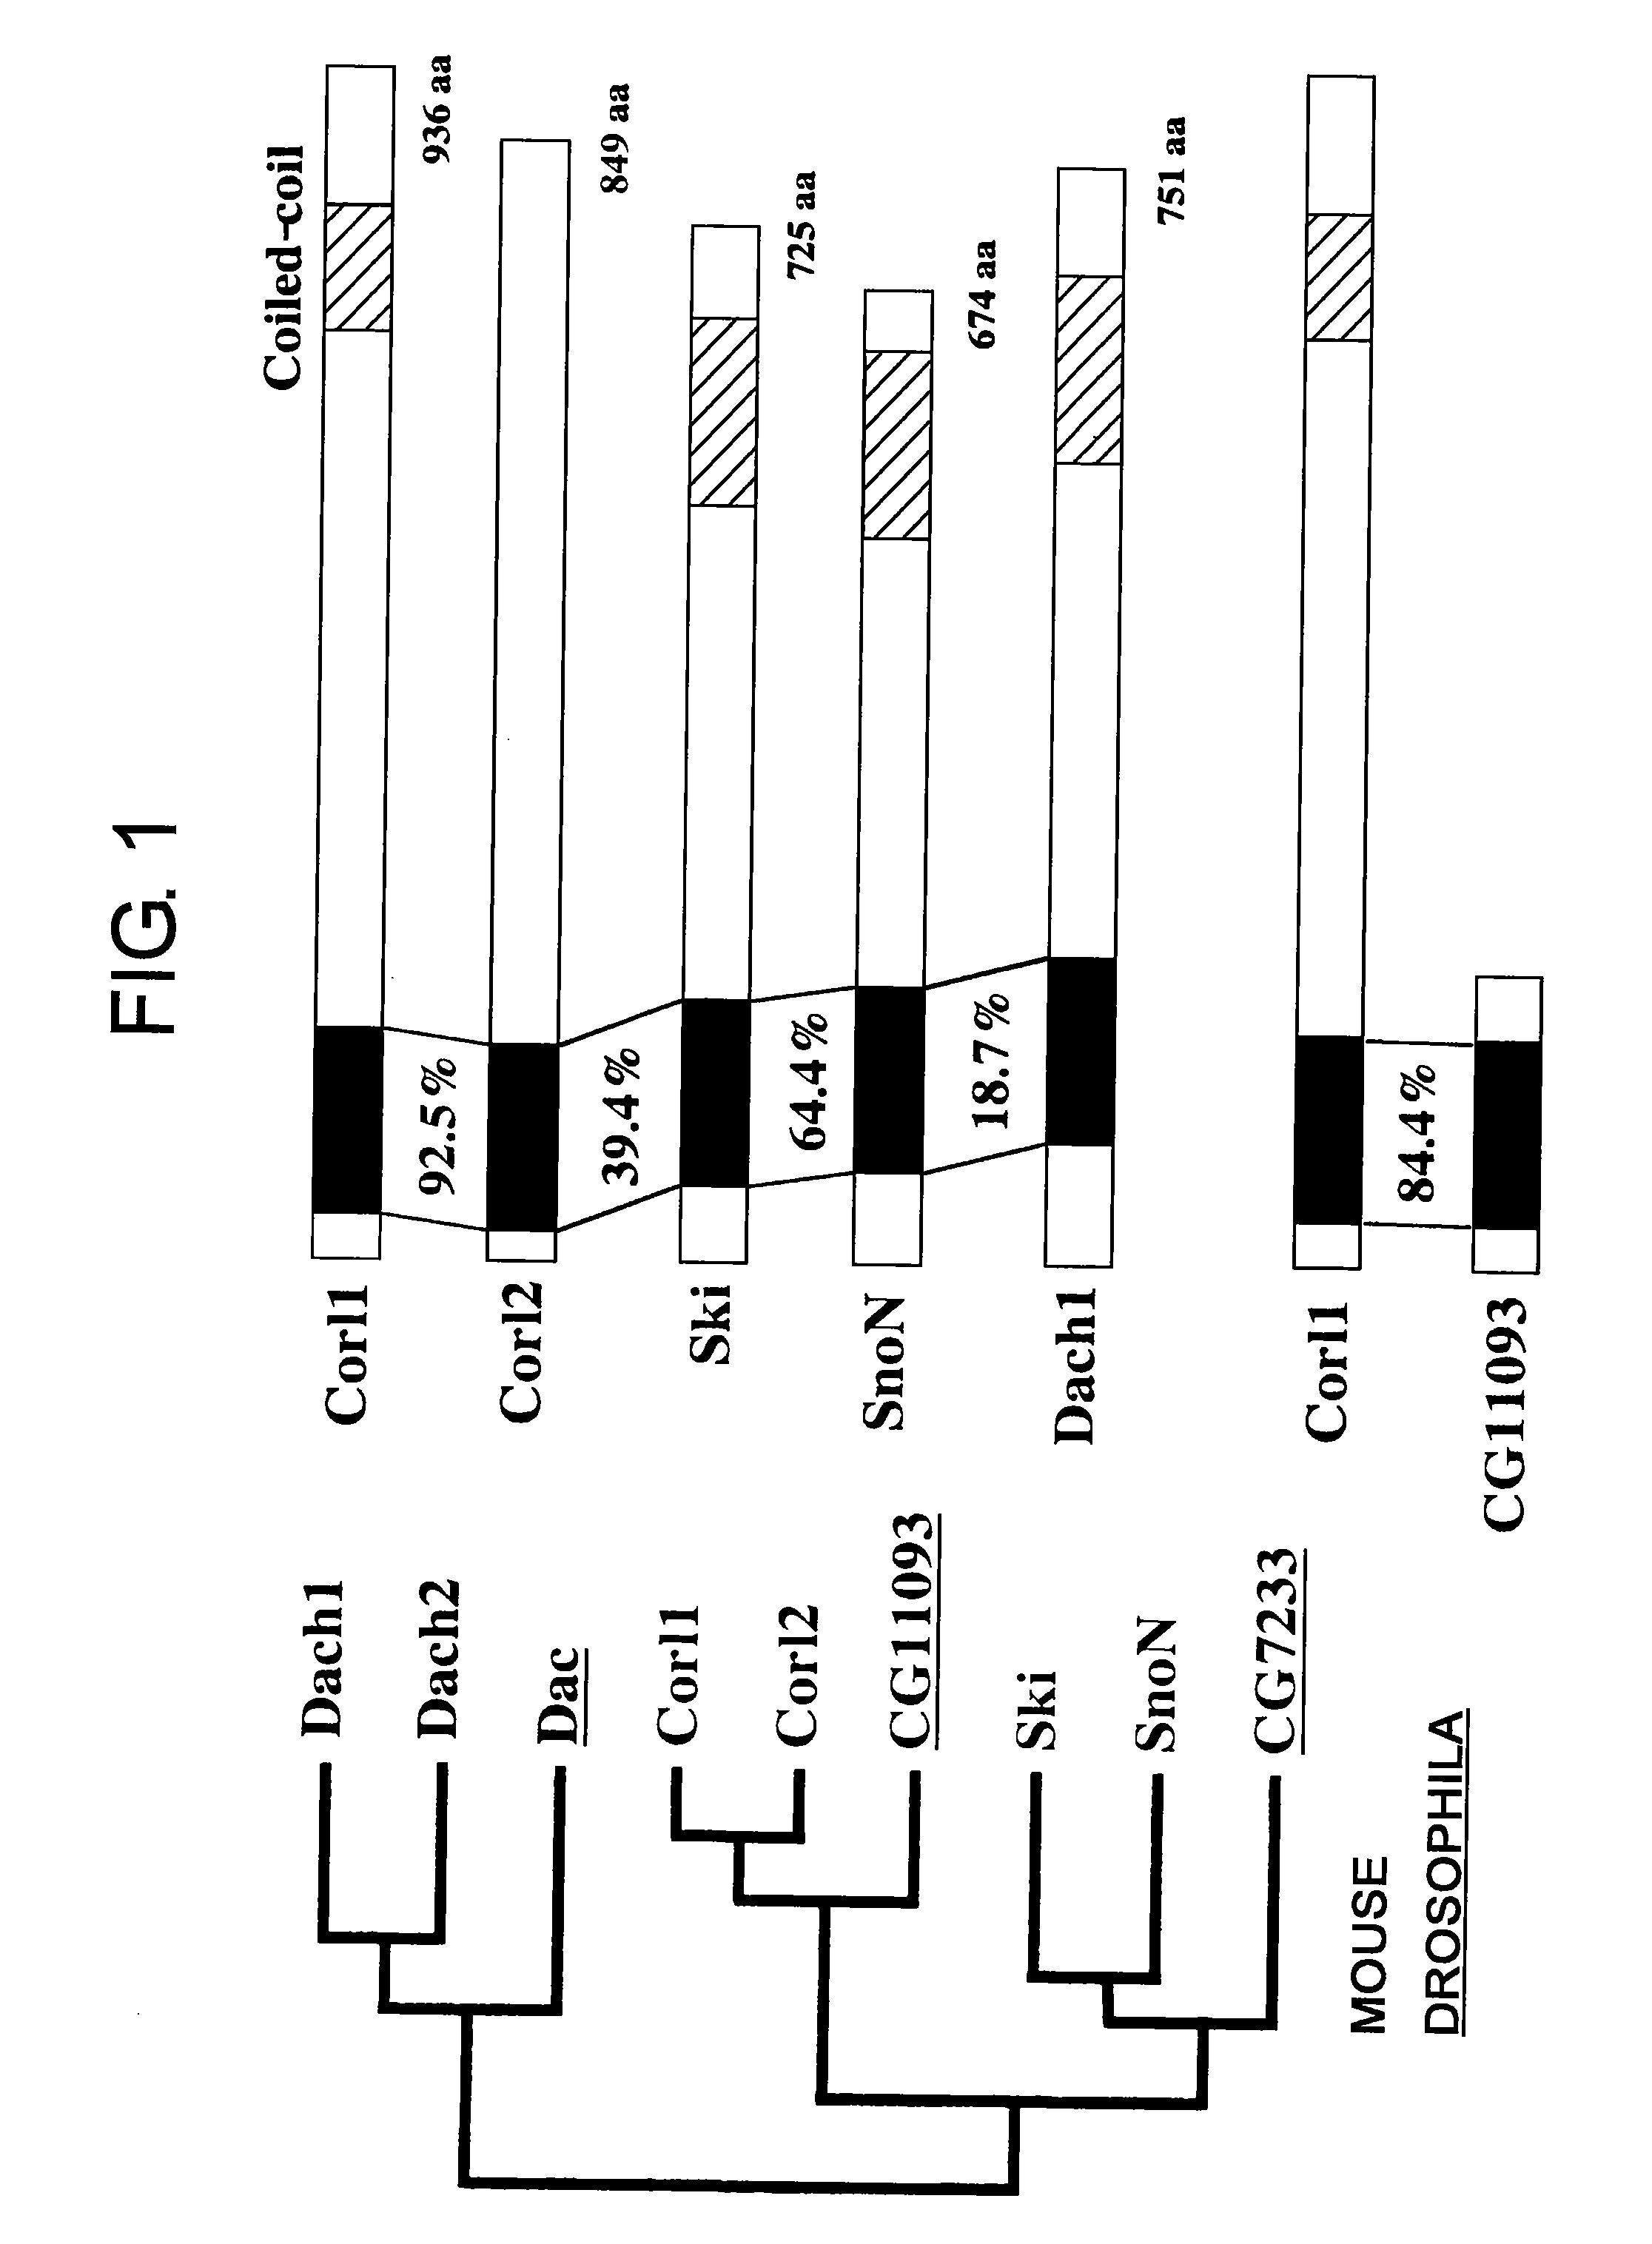 Methods of Distinguishing Types of Spinal Neurons Using Corl1 Gene as an Indicator